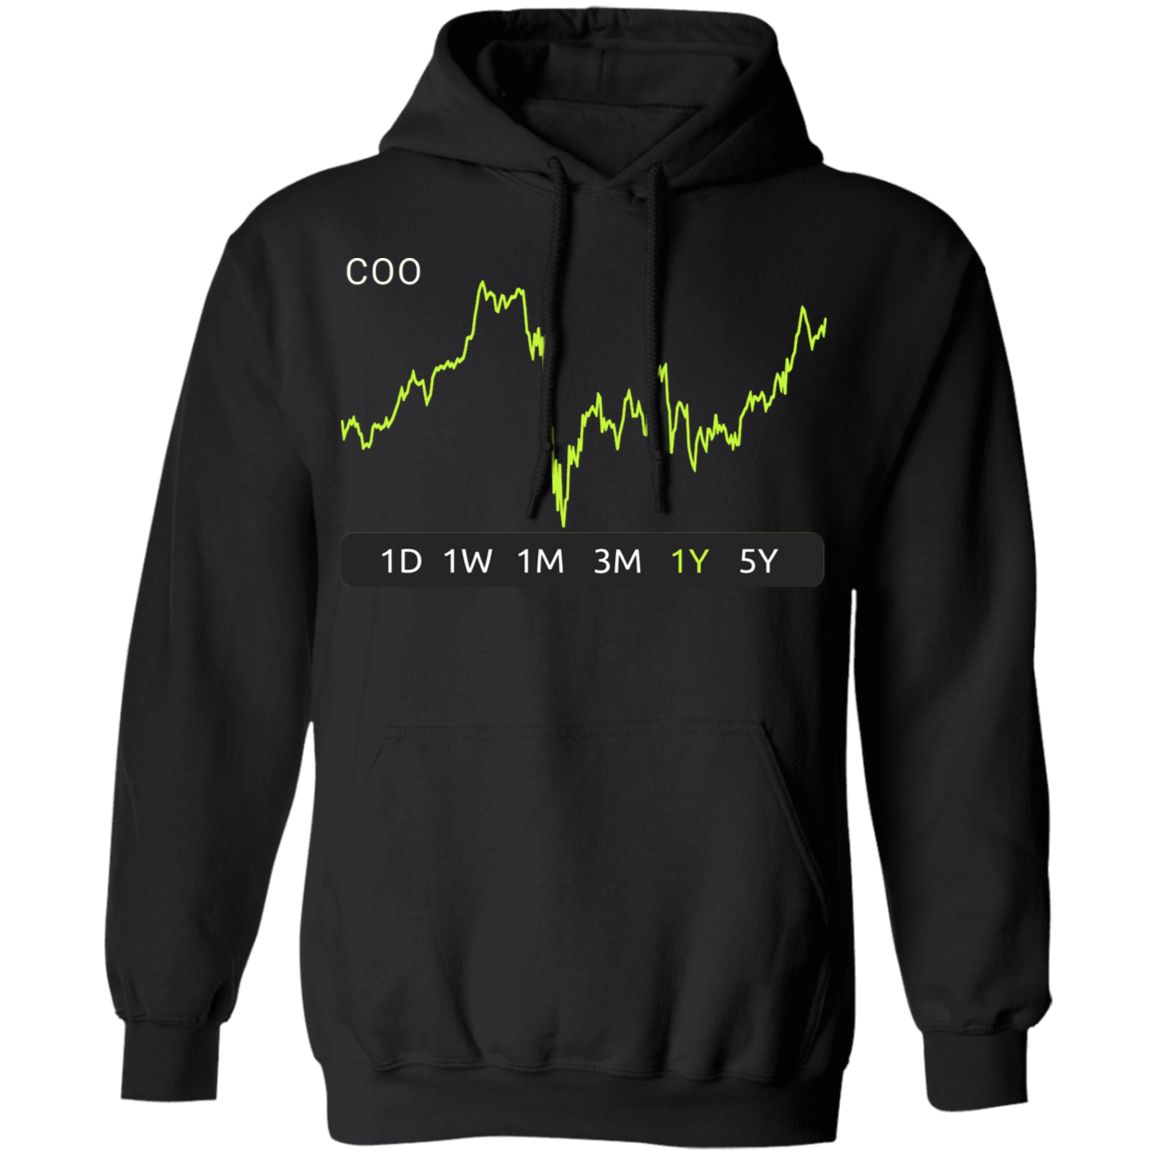 COO Stock 1y Pullover Hoodie